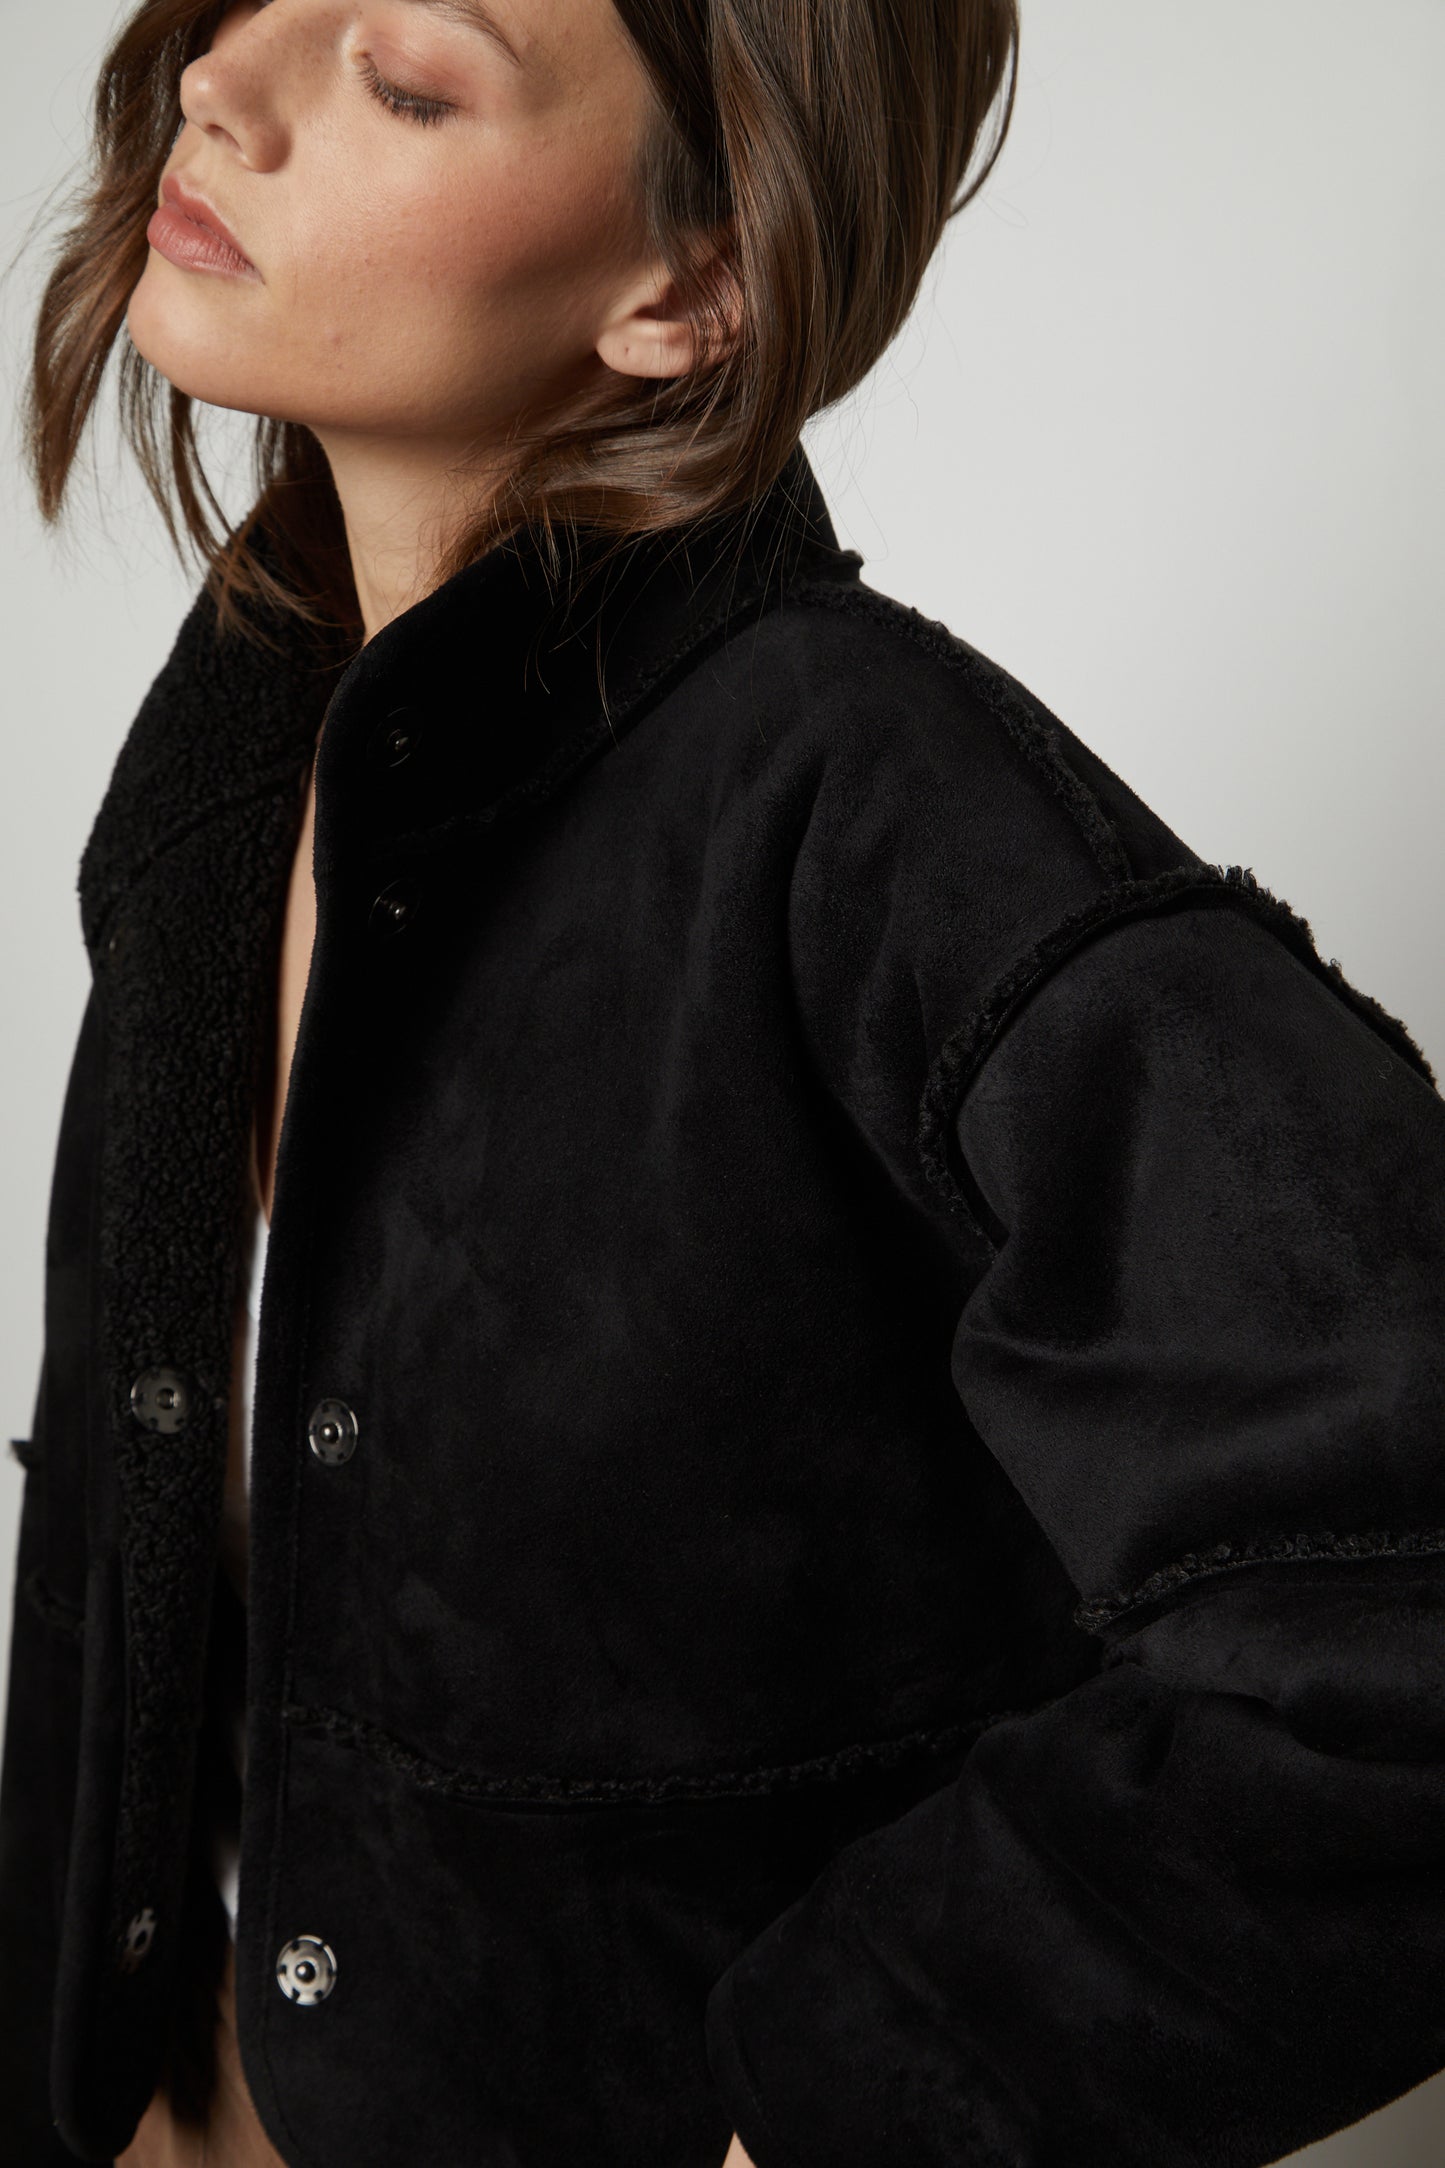 The model is wearing a Velvet by Graham & Spencer KELLY LUX SHERPA REVERSIBLE JACKET.-26910369218753